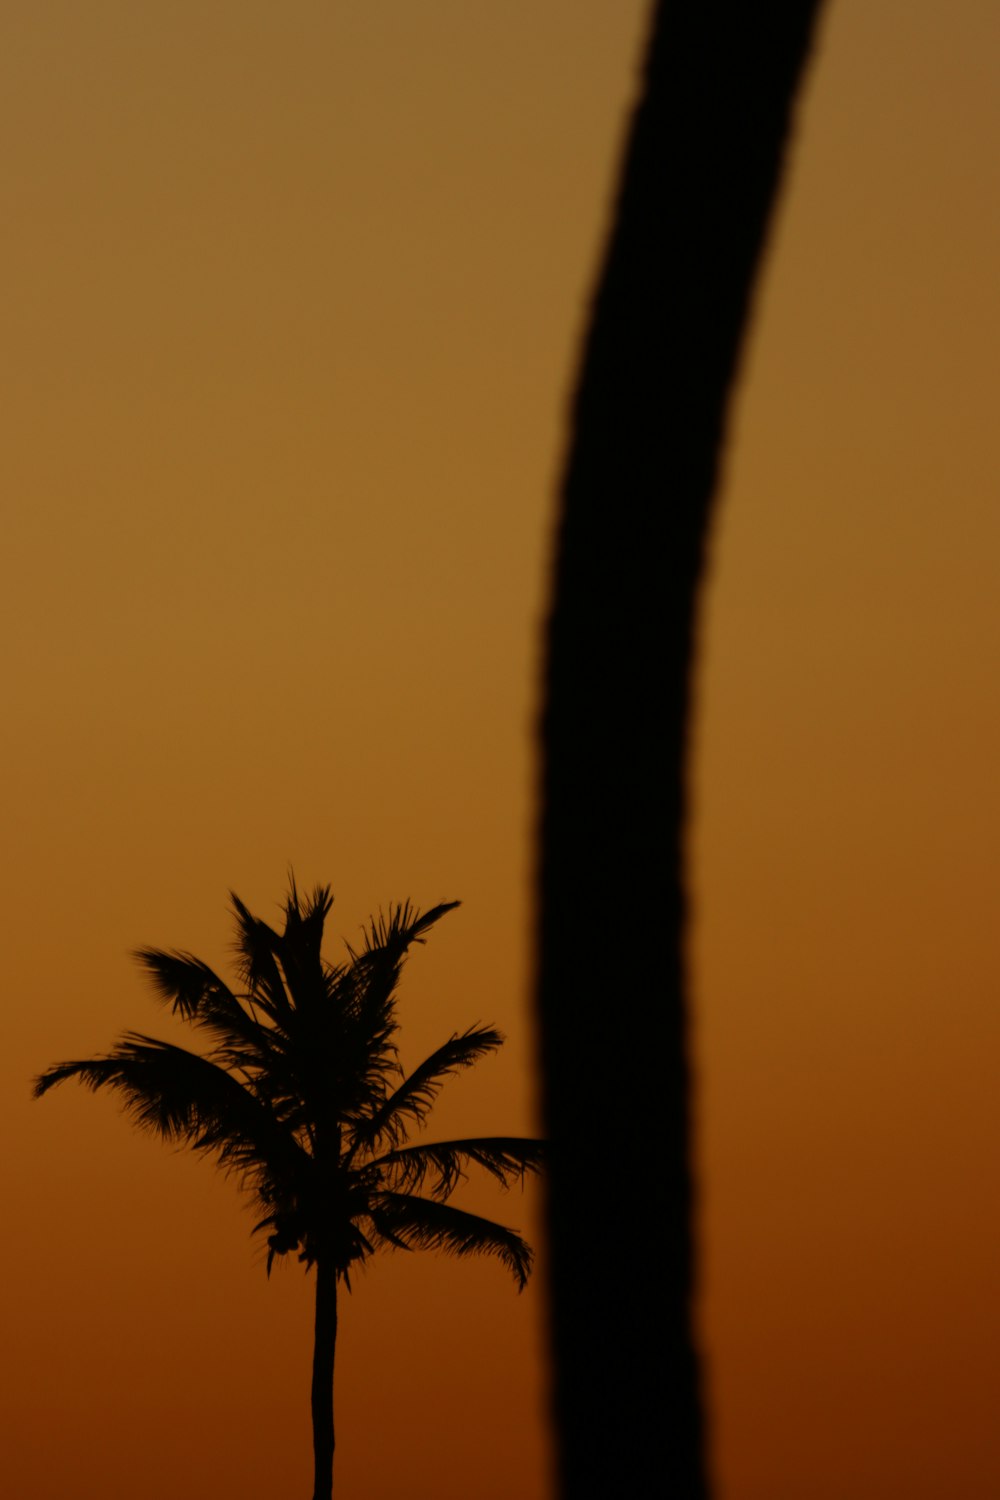 the silhouette of a palm tree against a sunset sky